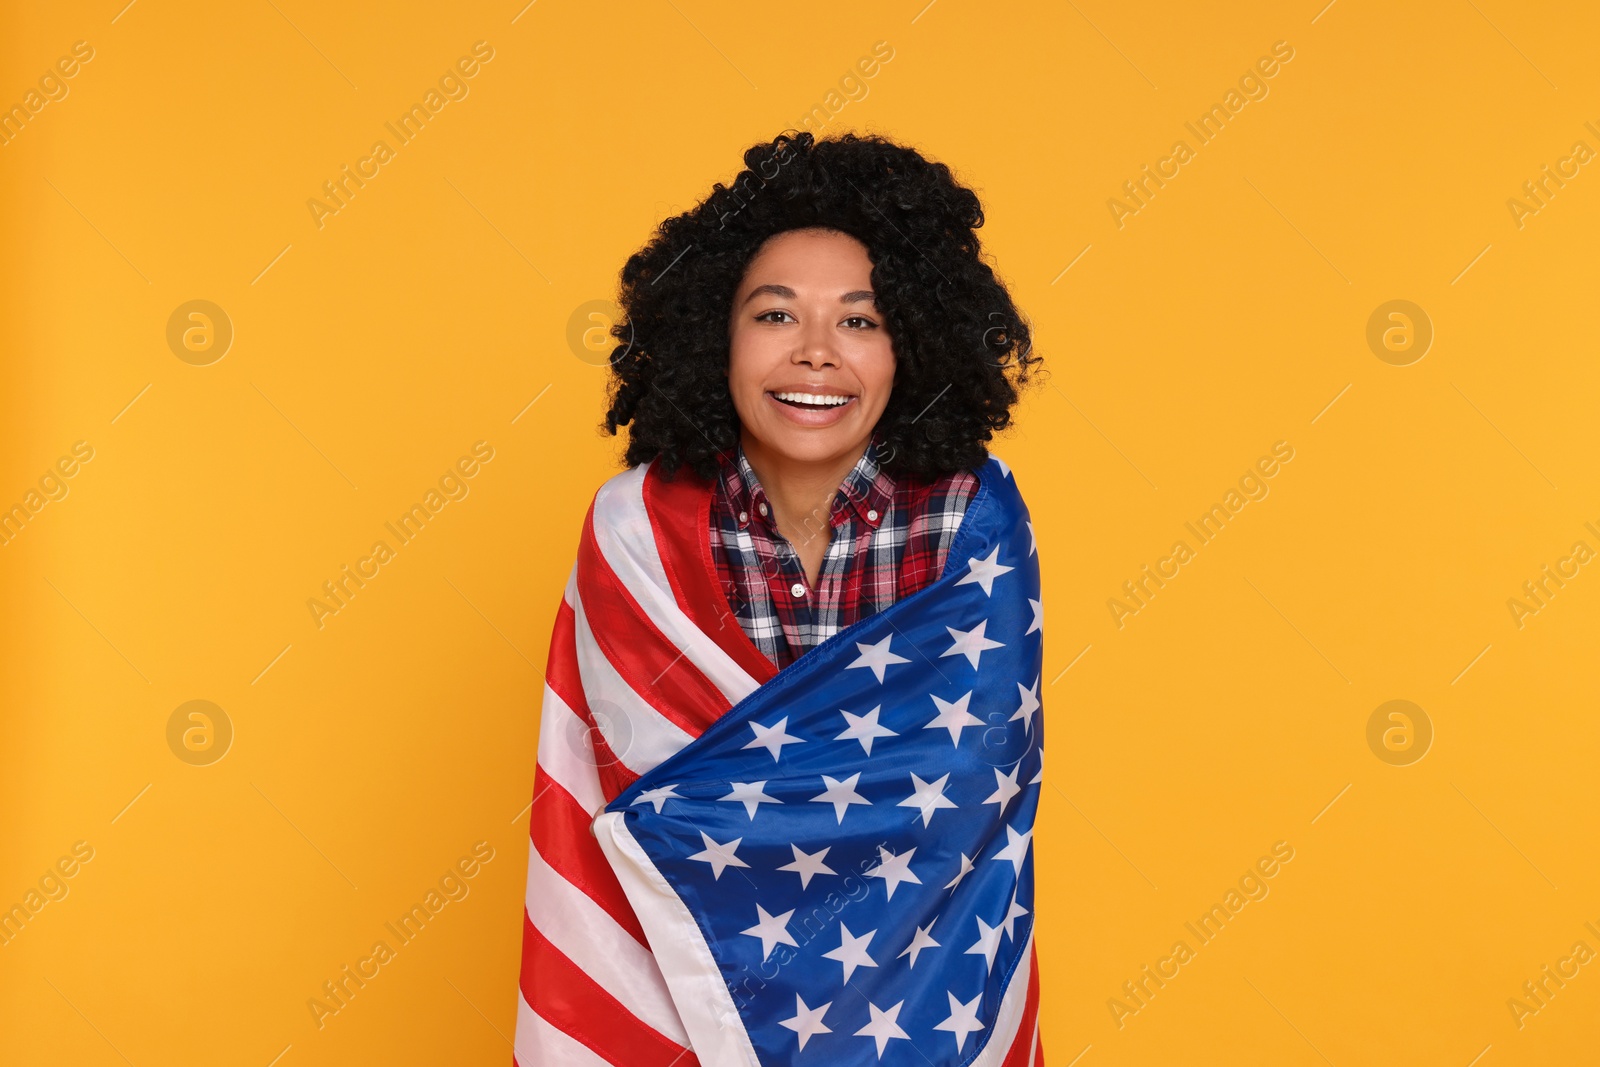 Photo of 4th of July - Independence Day of USA. Happy woman with American flag on yellow background